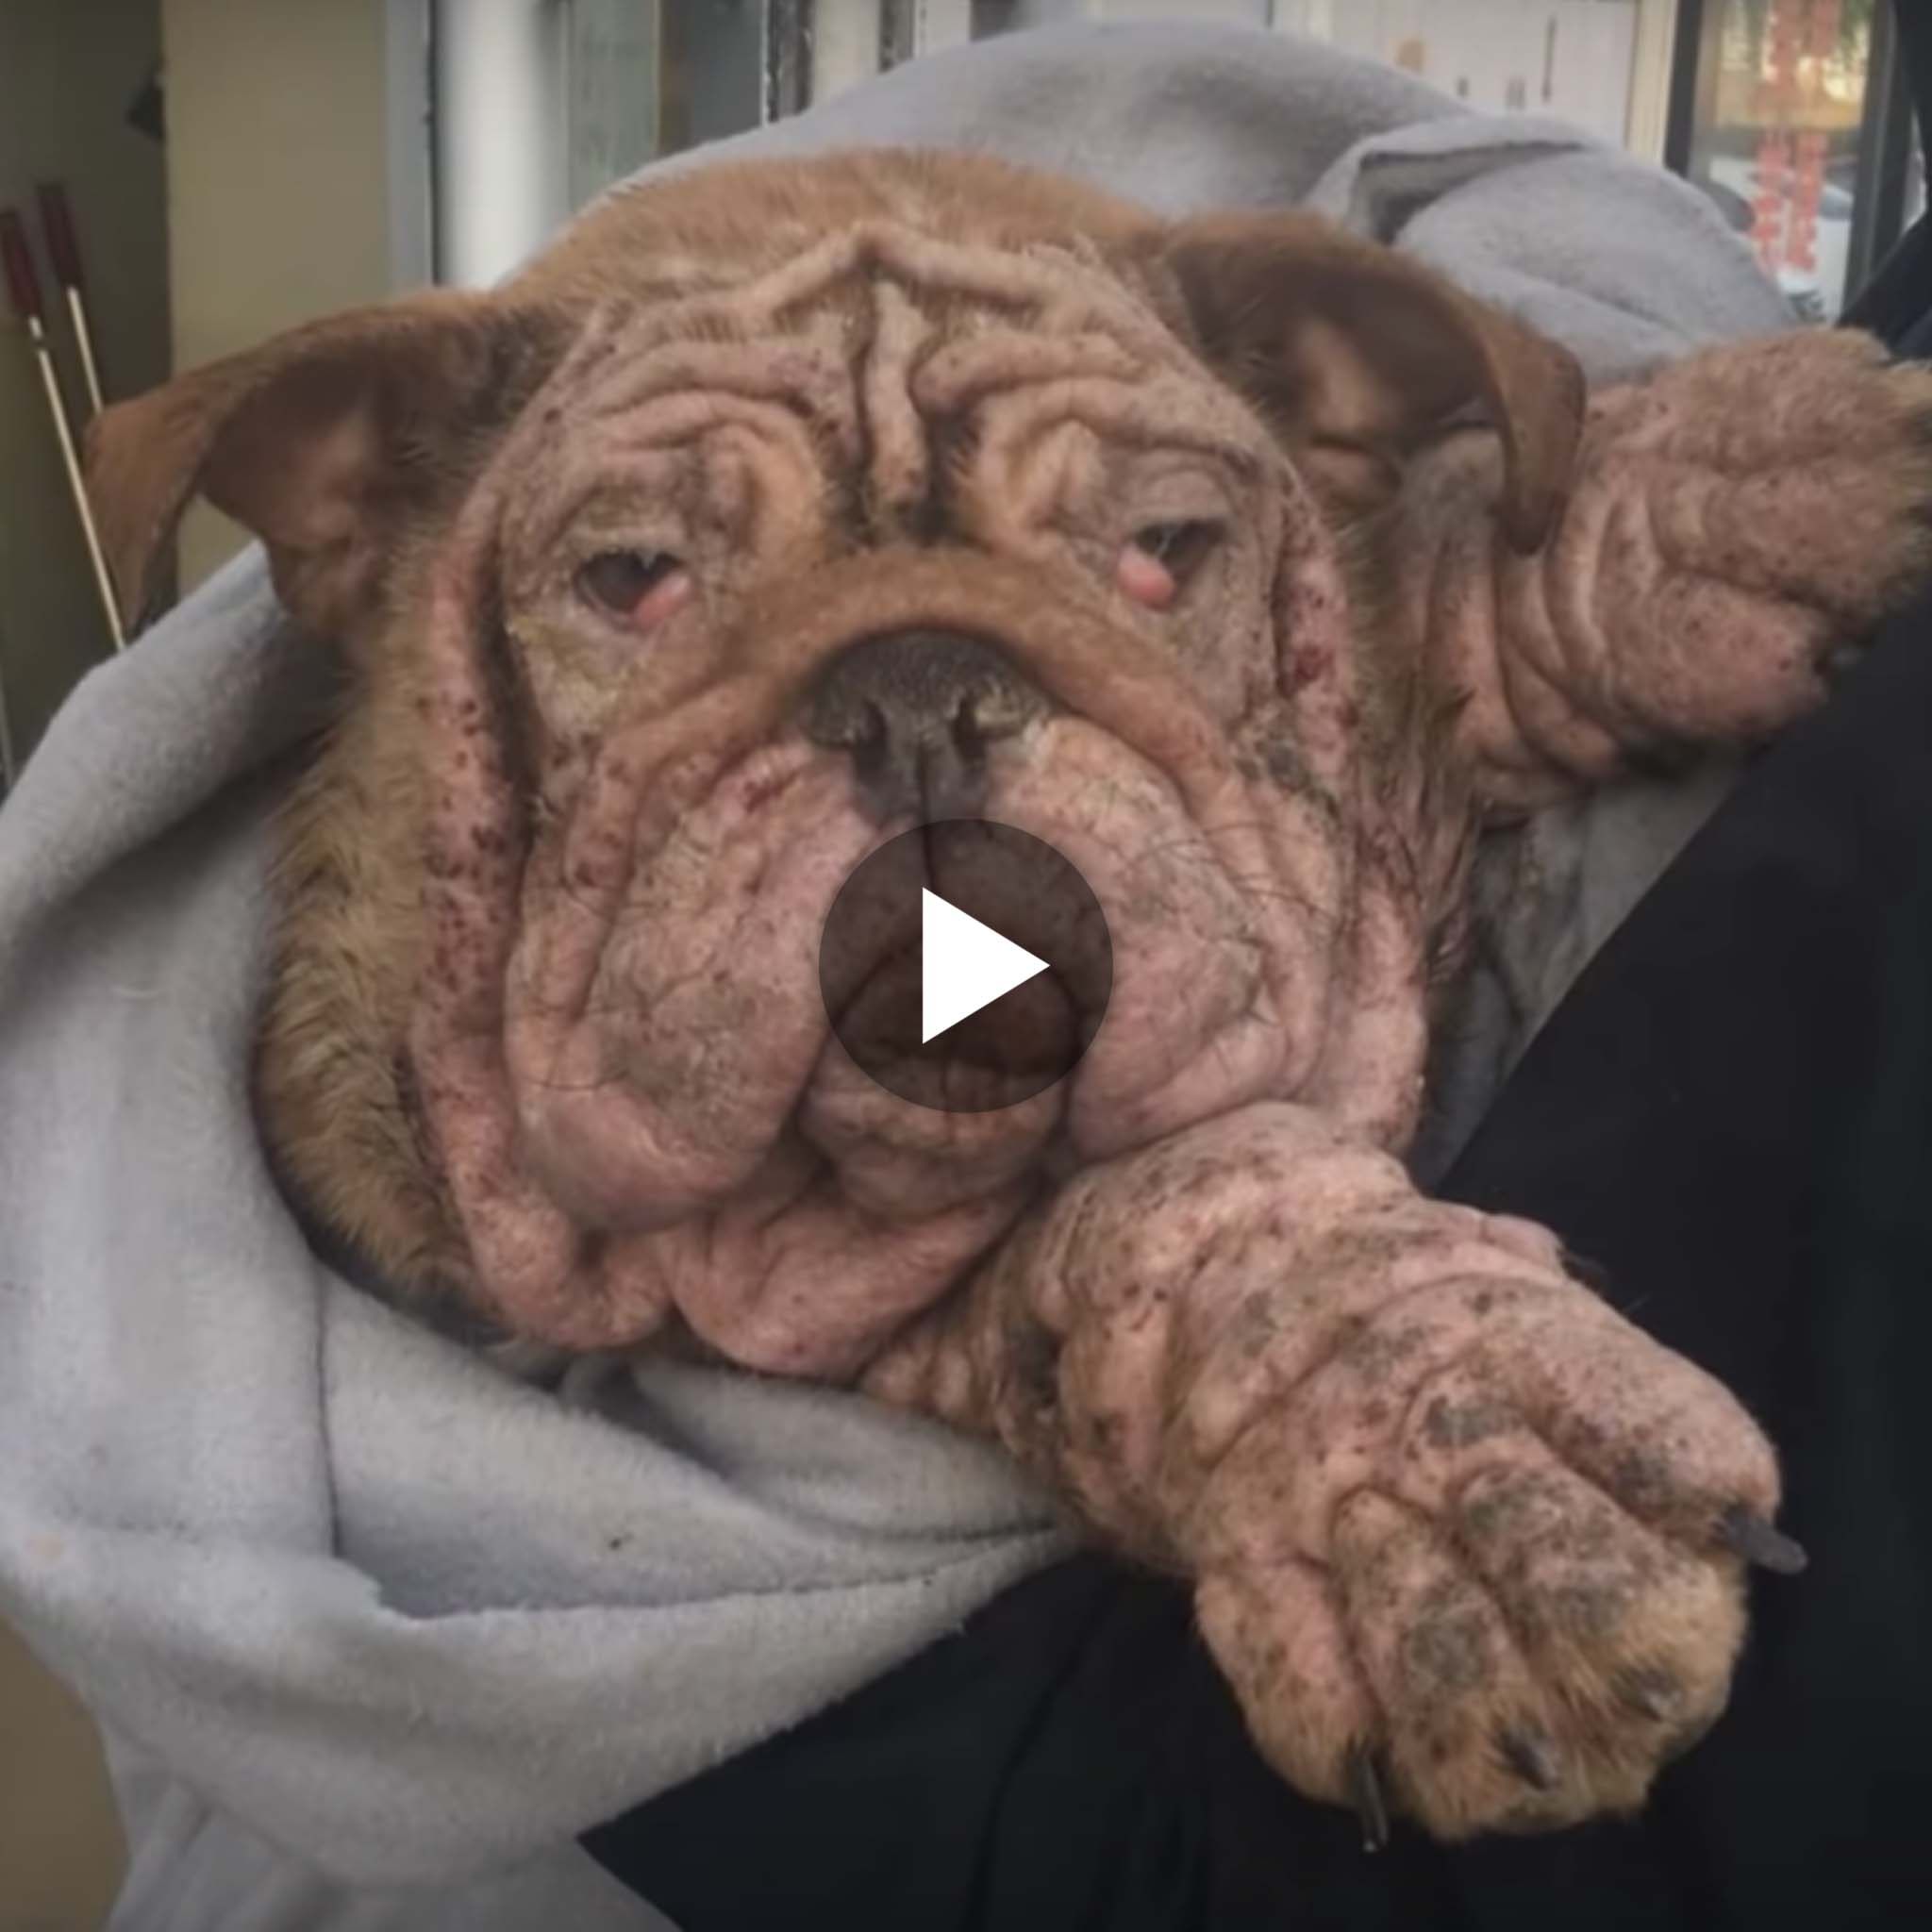 Abandoned Bulldog puppy forced to live on the street with severe mange, can’t imagine why the previous owner left him like that